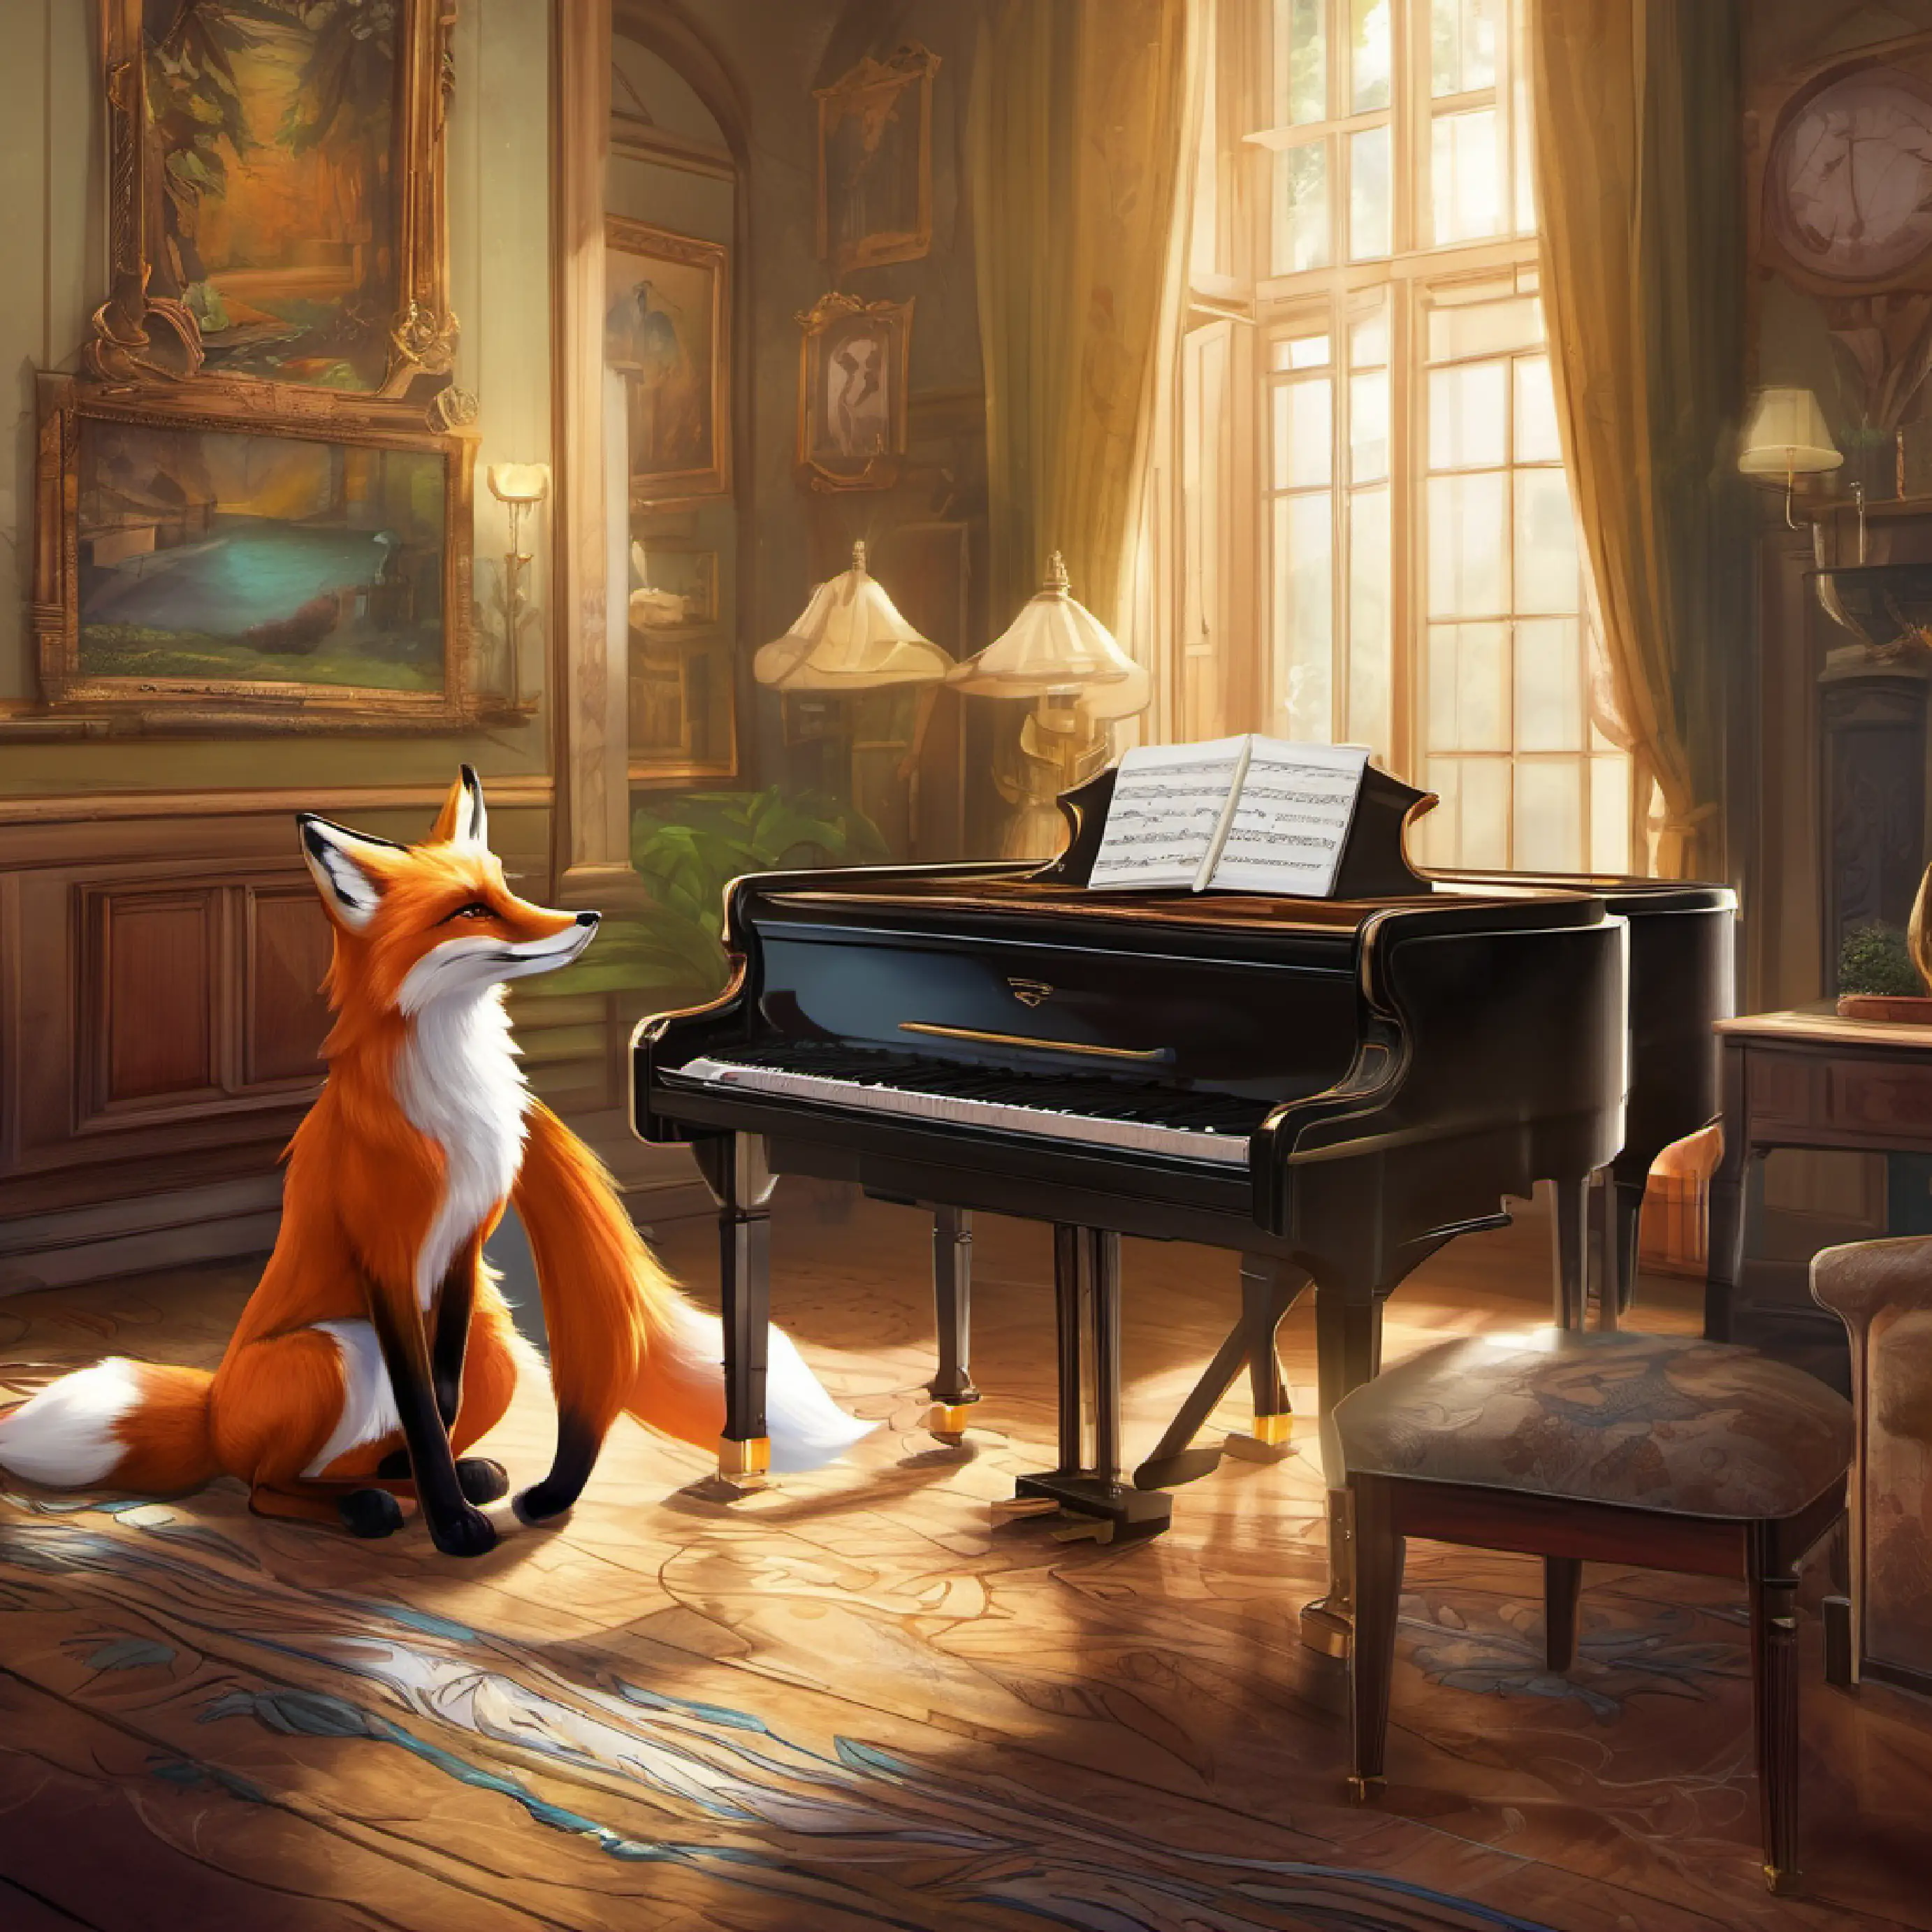 Fox solves the piano riddle, eager to continue.